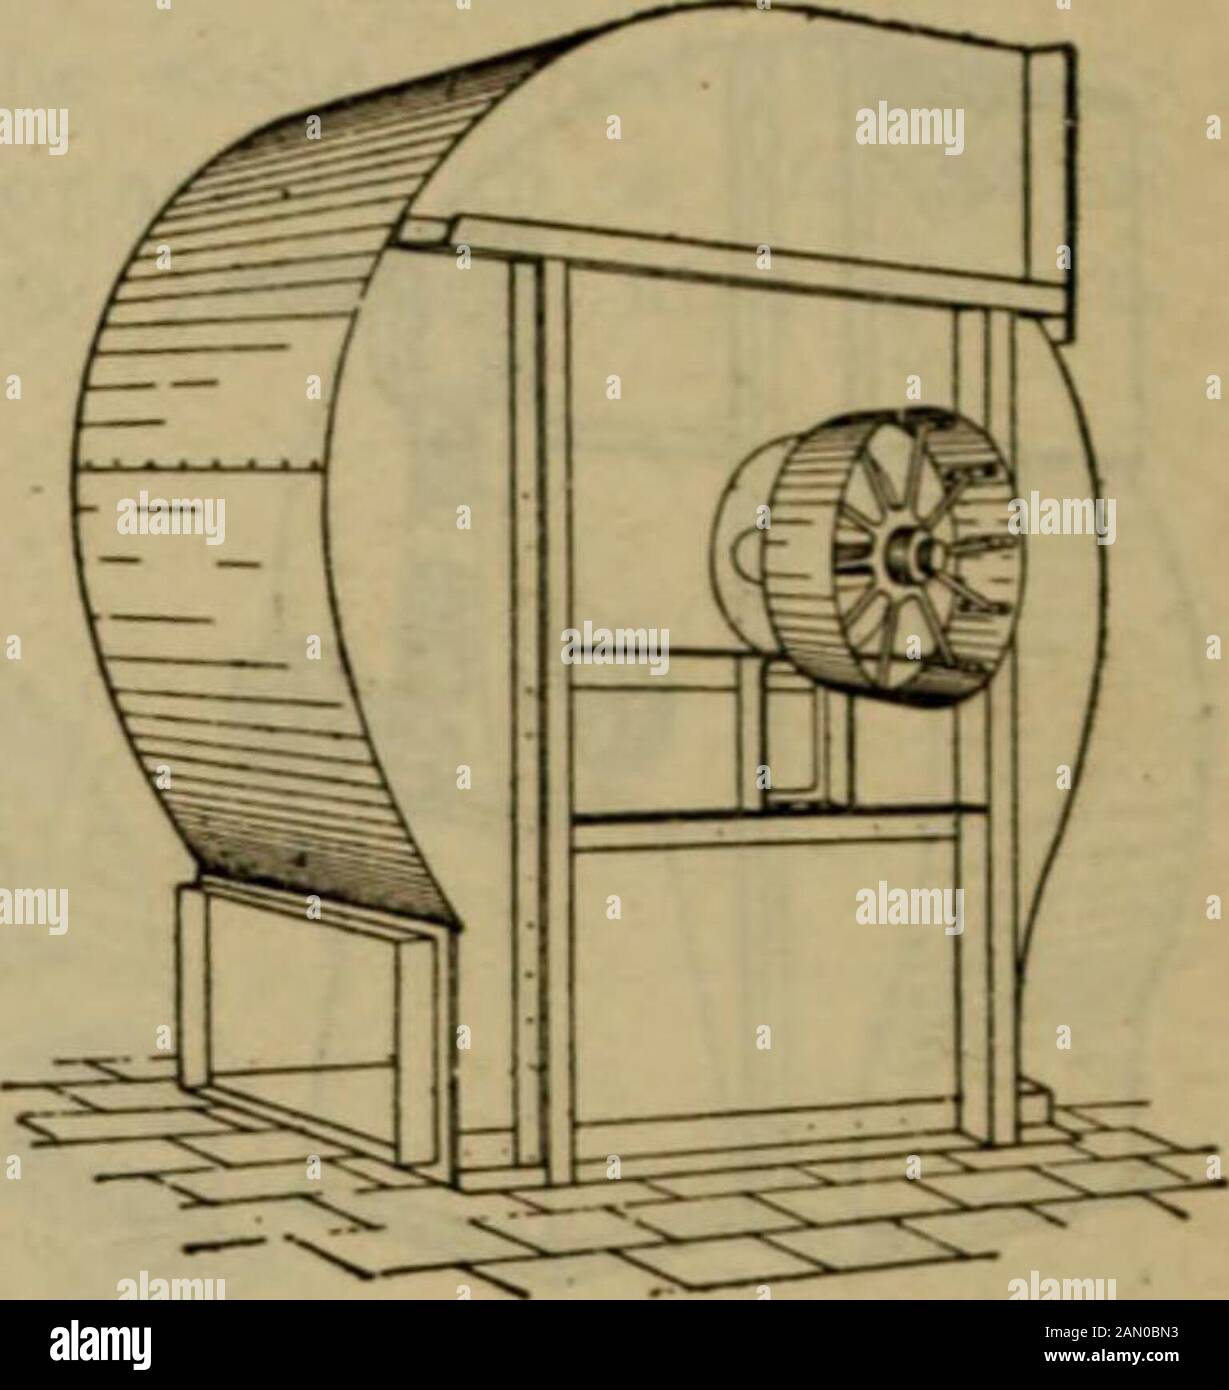 Handbook for heating and ventilating engineers . Fig. 90. Fig. 91. The circular opening in the housing around the shaftof the wheel is the inlet of the fan, the air being thrownby centrifugal force to the periphery and at the same timegiven a circular motion, thus leaving the fan tangentiallythrough the discharge opening. Fans may be obtained whichwill deliver at any angle around the circumference, and fansmay be obtained with two or more discharge openings, usu-ally referred to as multiple discharge fans, as shown inFig. 91. Some fans have double side inlets, 1. e., air entersthe fan from eac Stock Photo